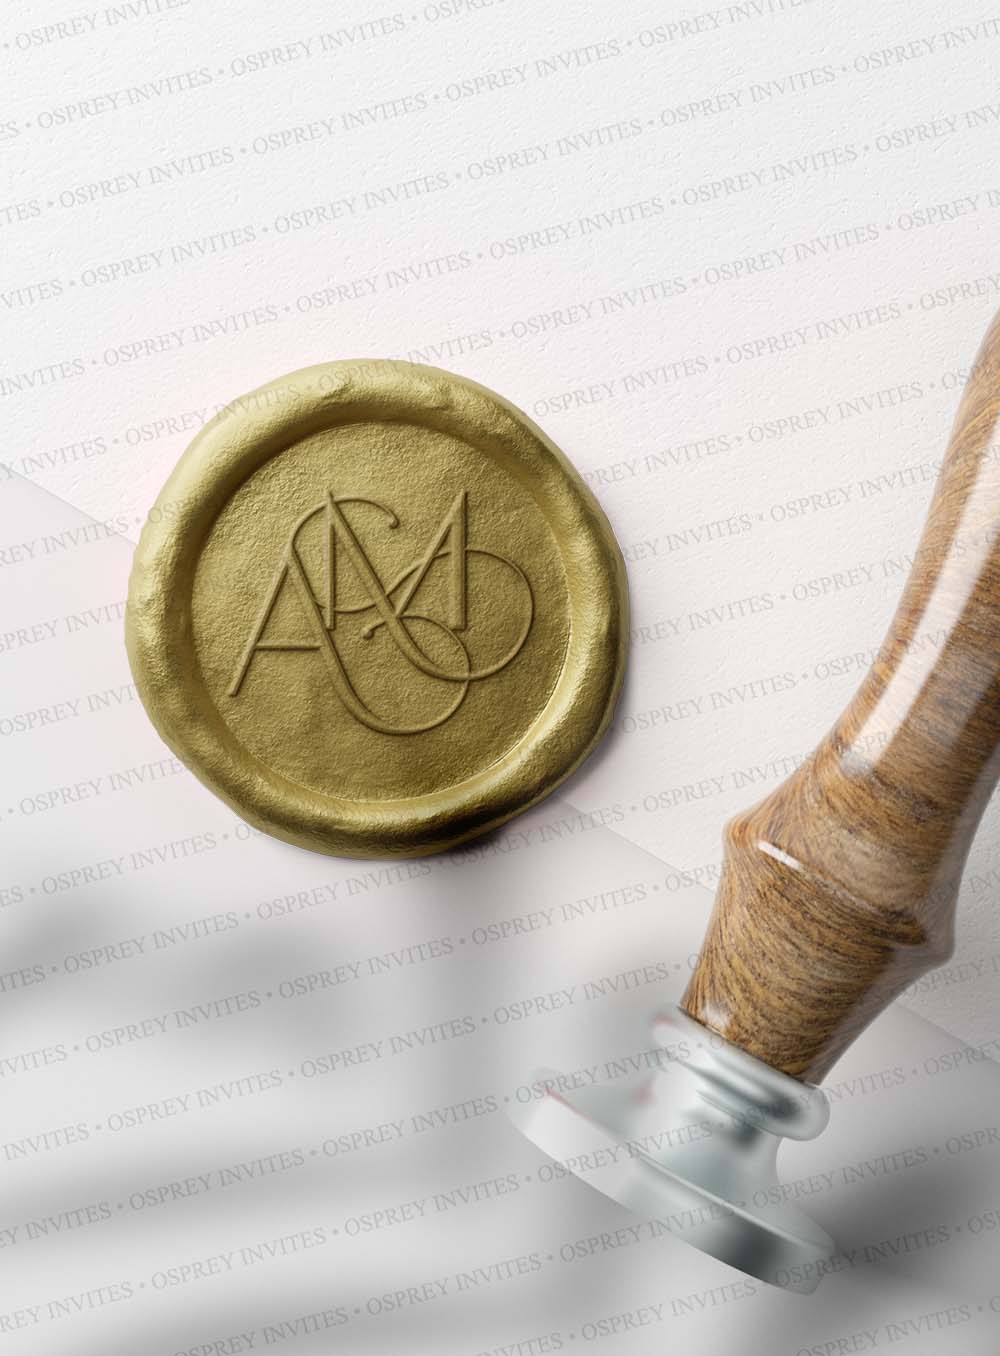 Self adhesive wax seals stickers in India which can be customied wedding monogram with couple's name, these are customised wax seal stickers to use in printed invitation design and wedding stationery suite.